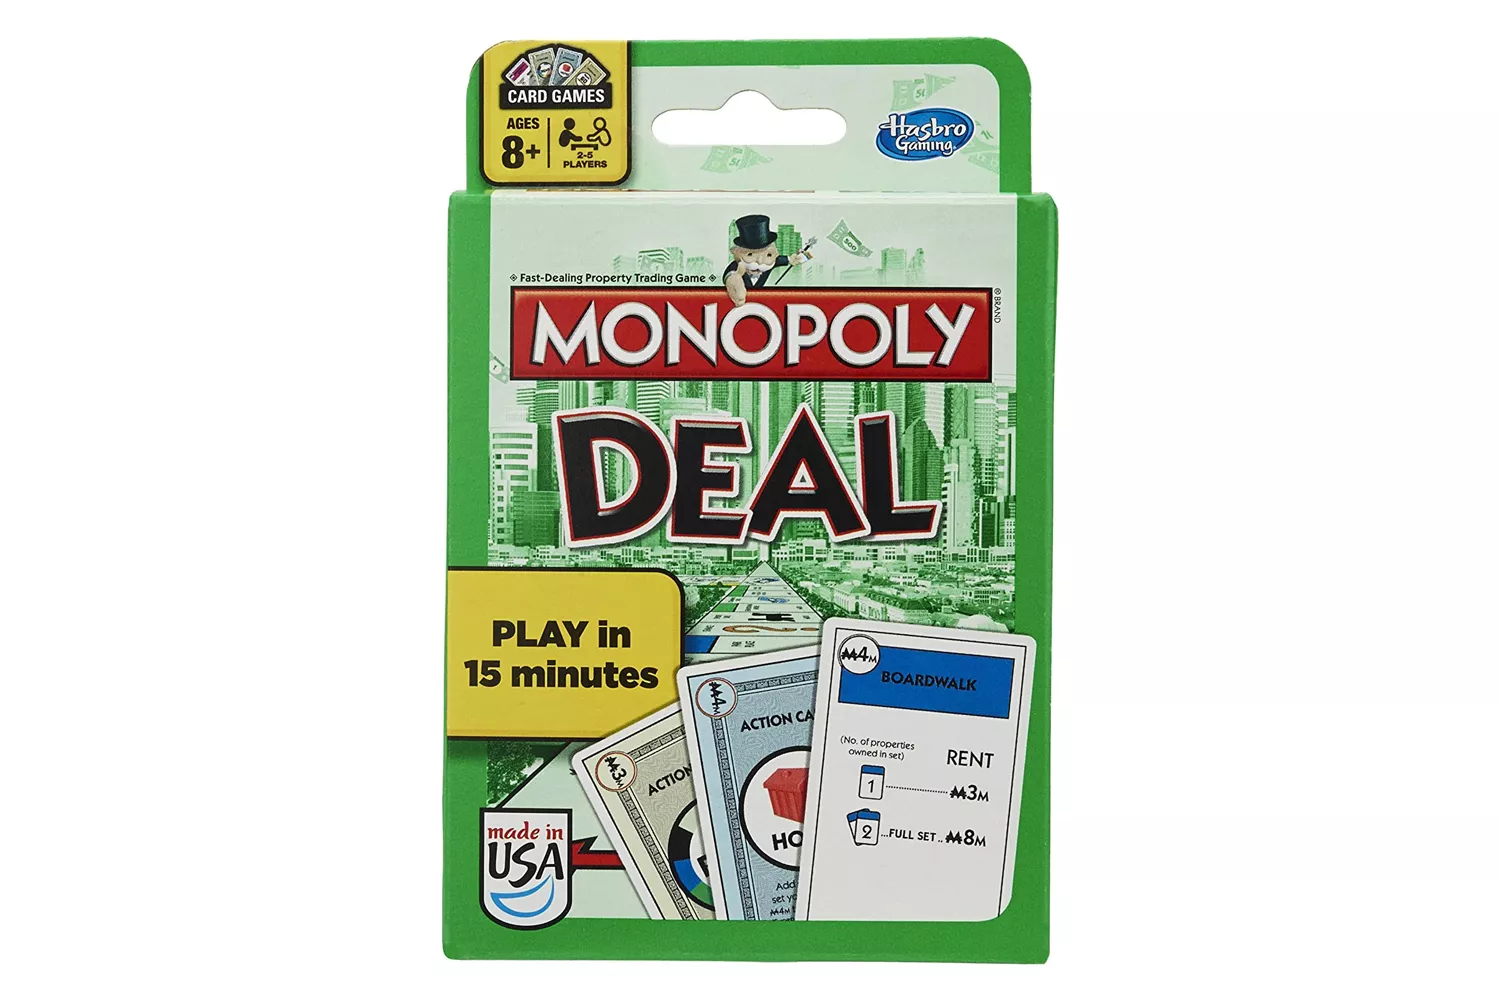 MONOPOLY Deal Card Game